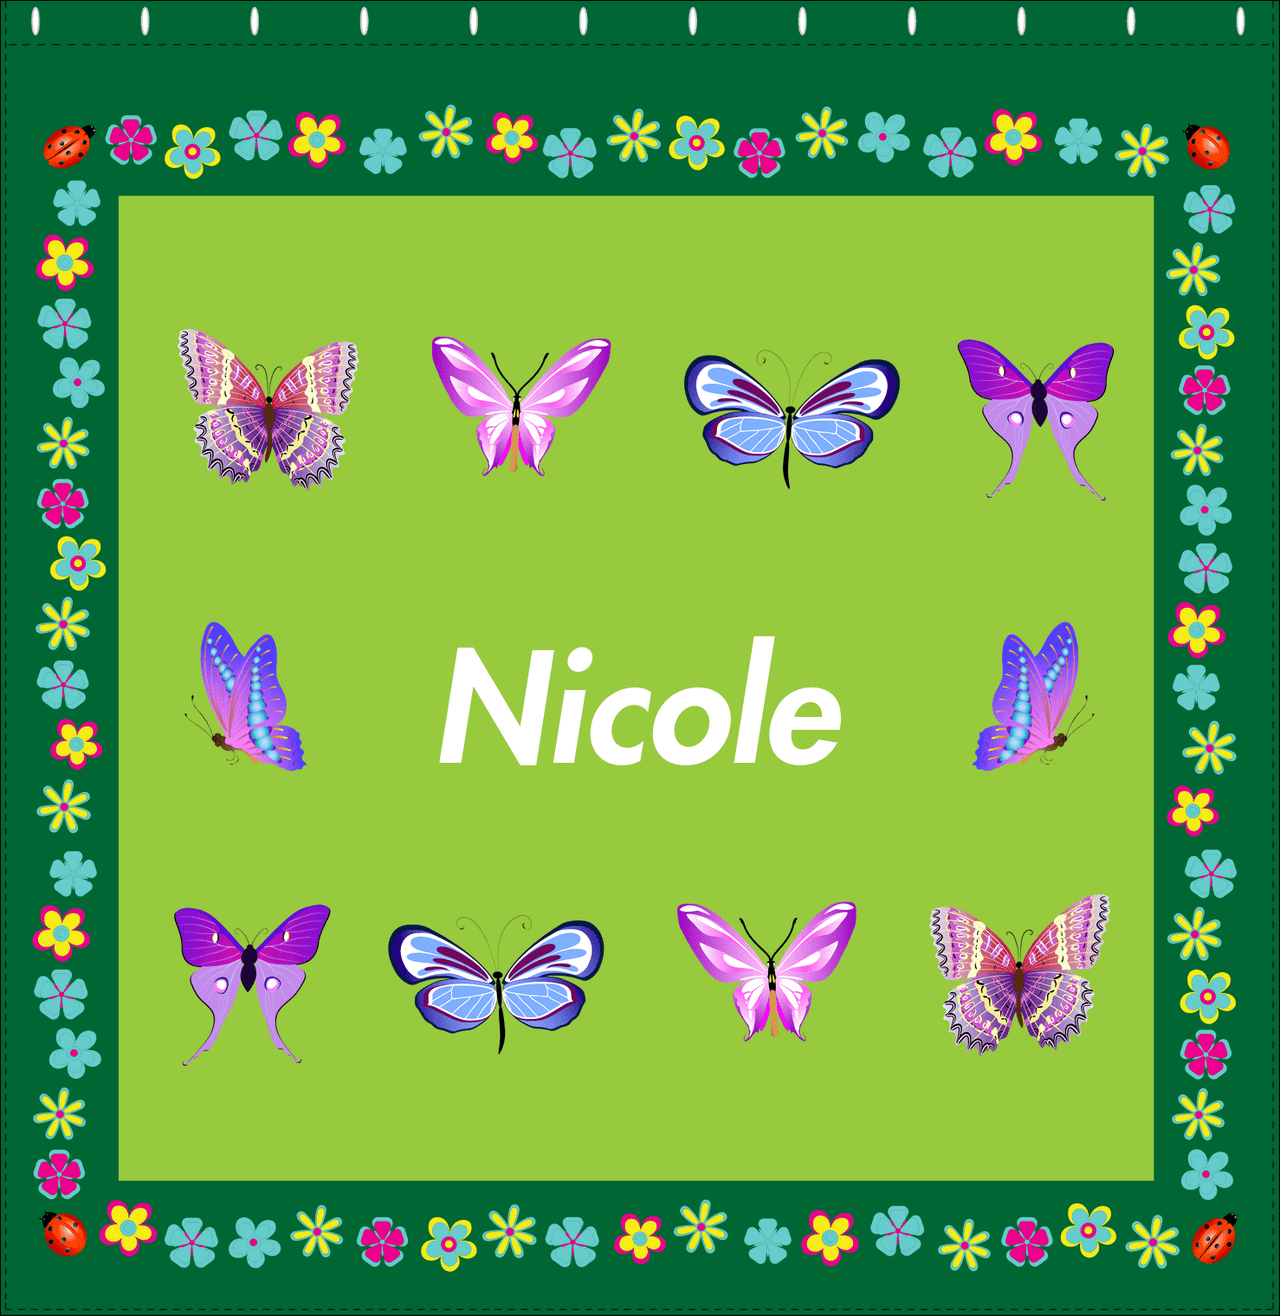 Personalized Butterfly Shower Curtain X - Green Background - Butterflies VI - Decorate View